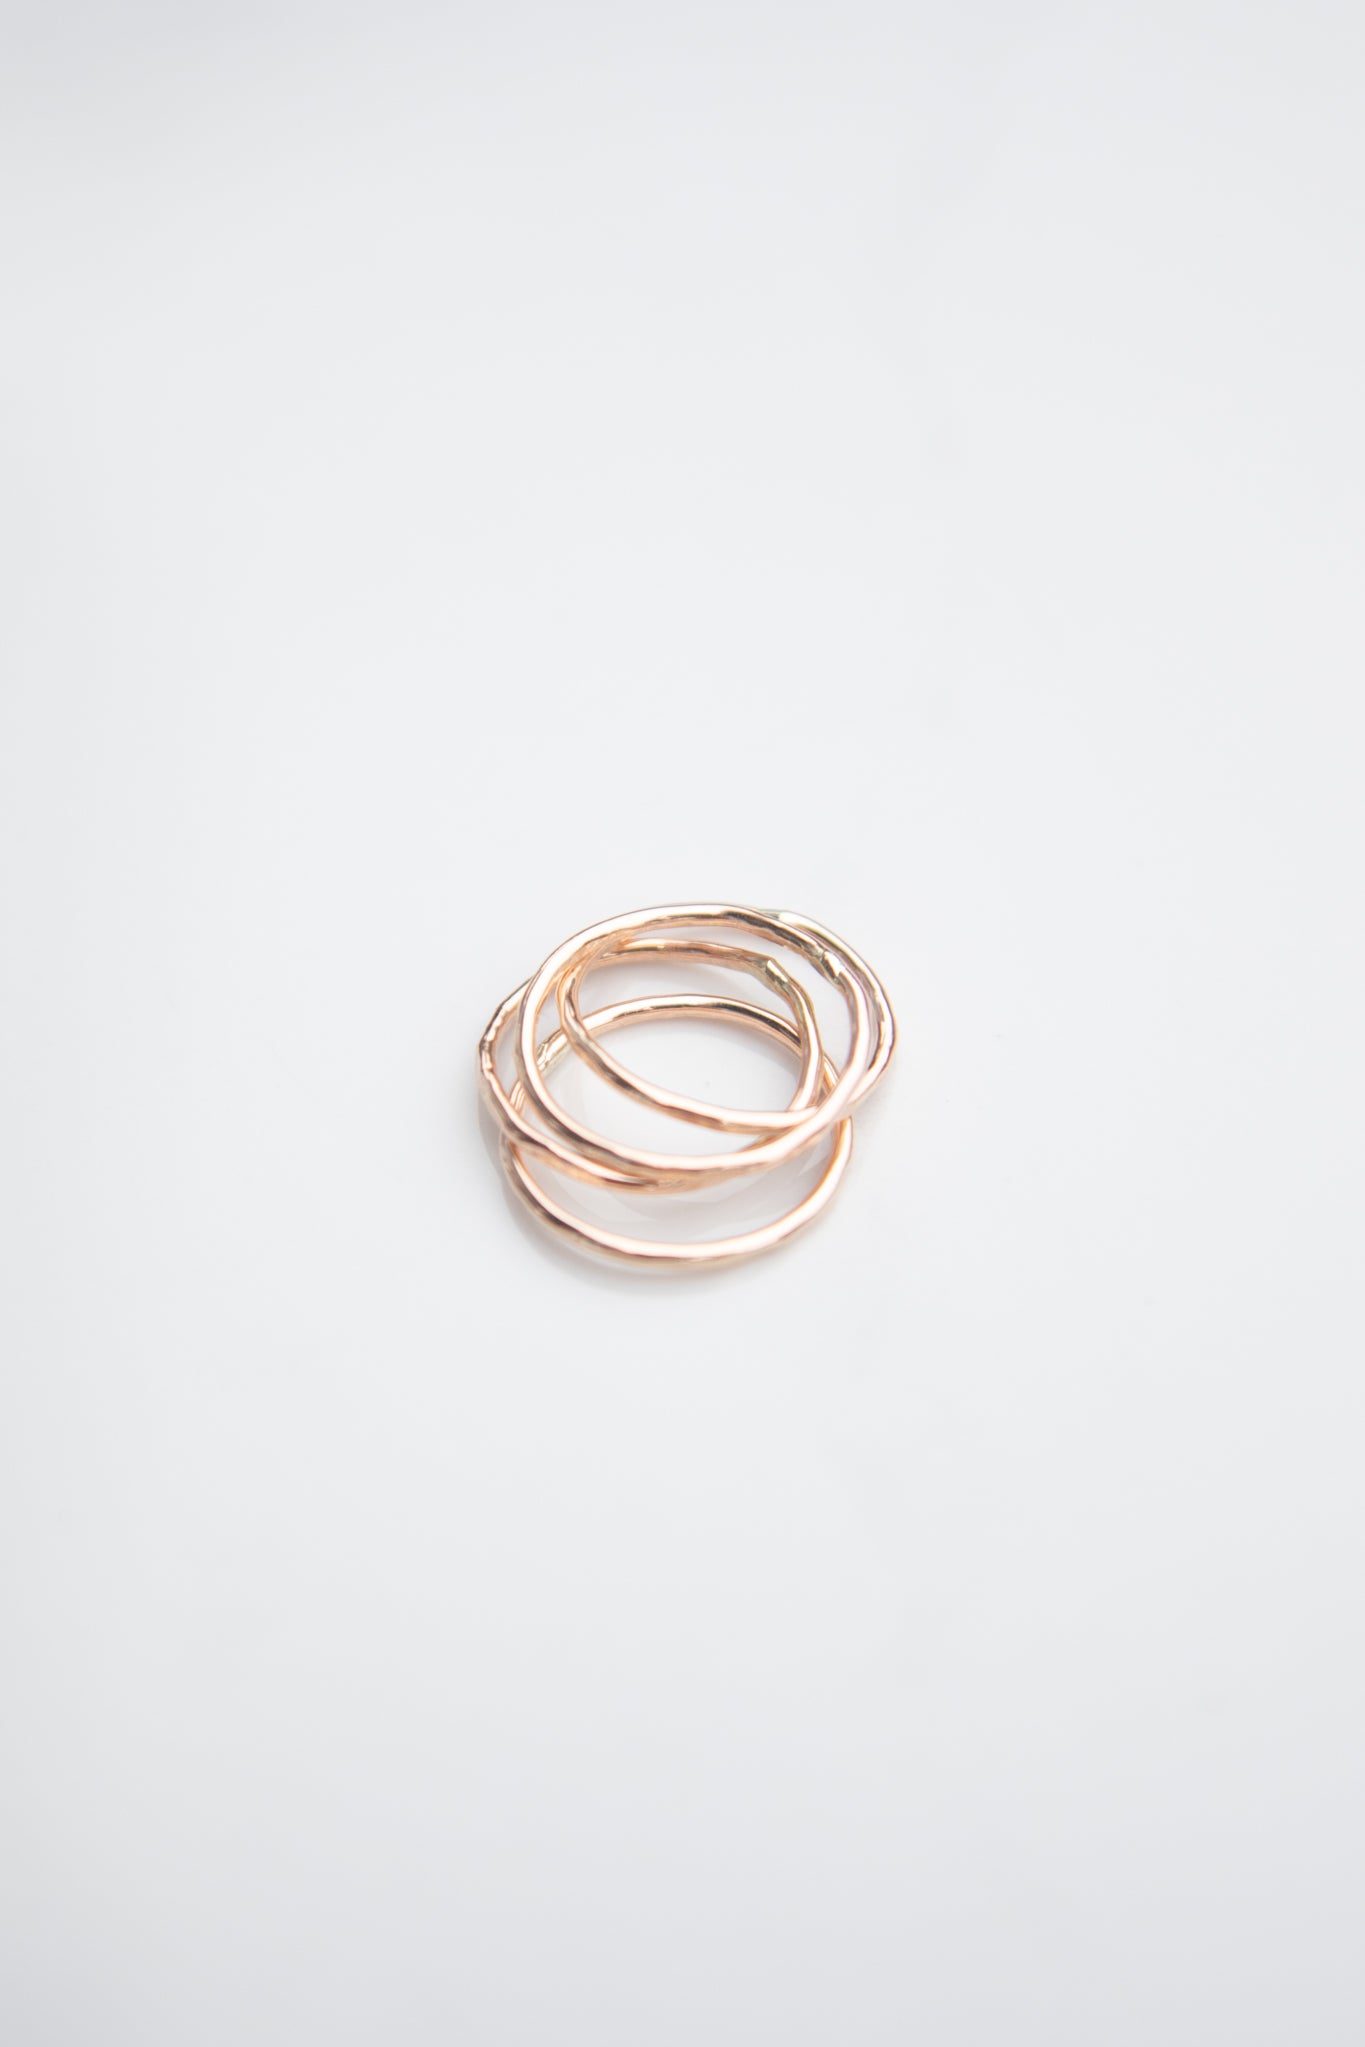 Hammered Stackable rings